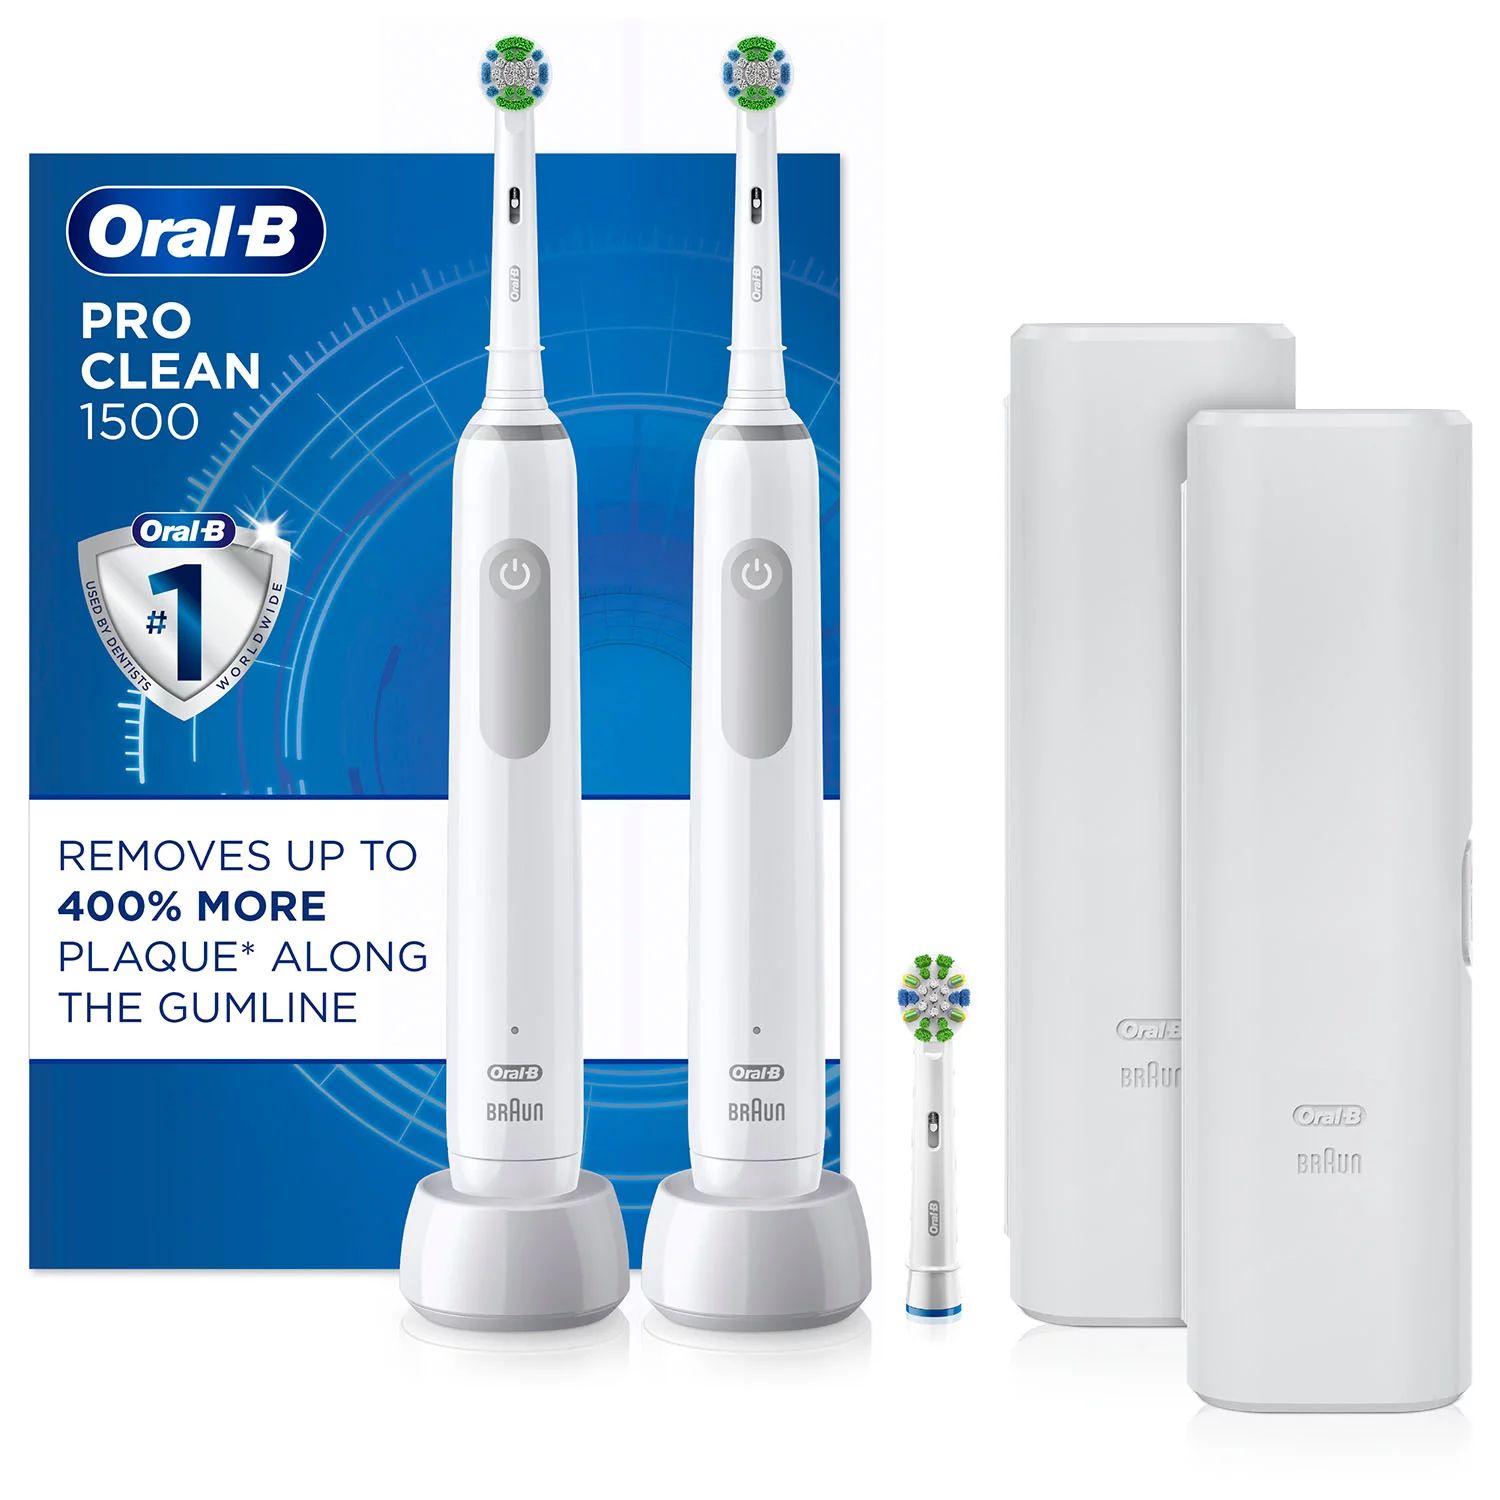 Oral-B Pro Clean 1500 Electric Rechargeable Toothbrush, Powered by Braun (2 pk.) | Sam's Club